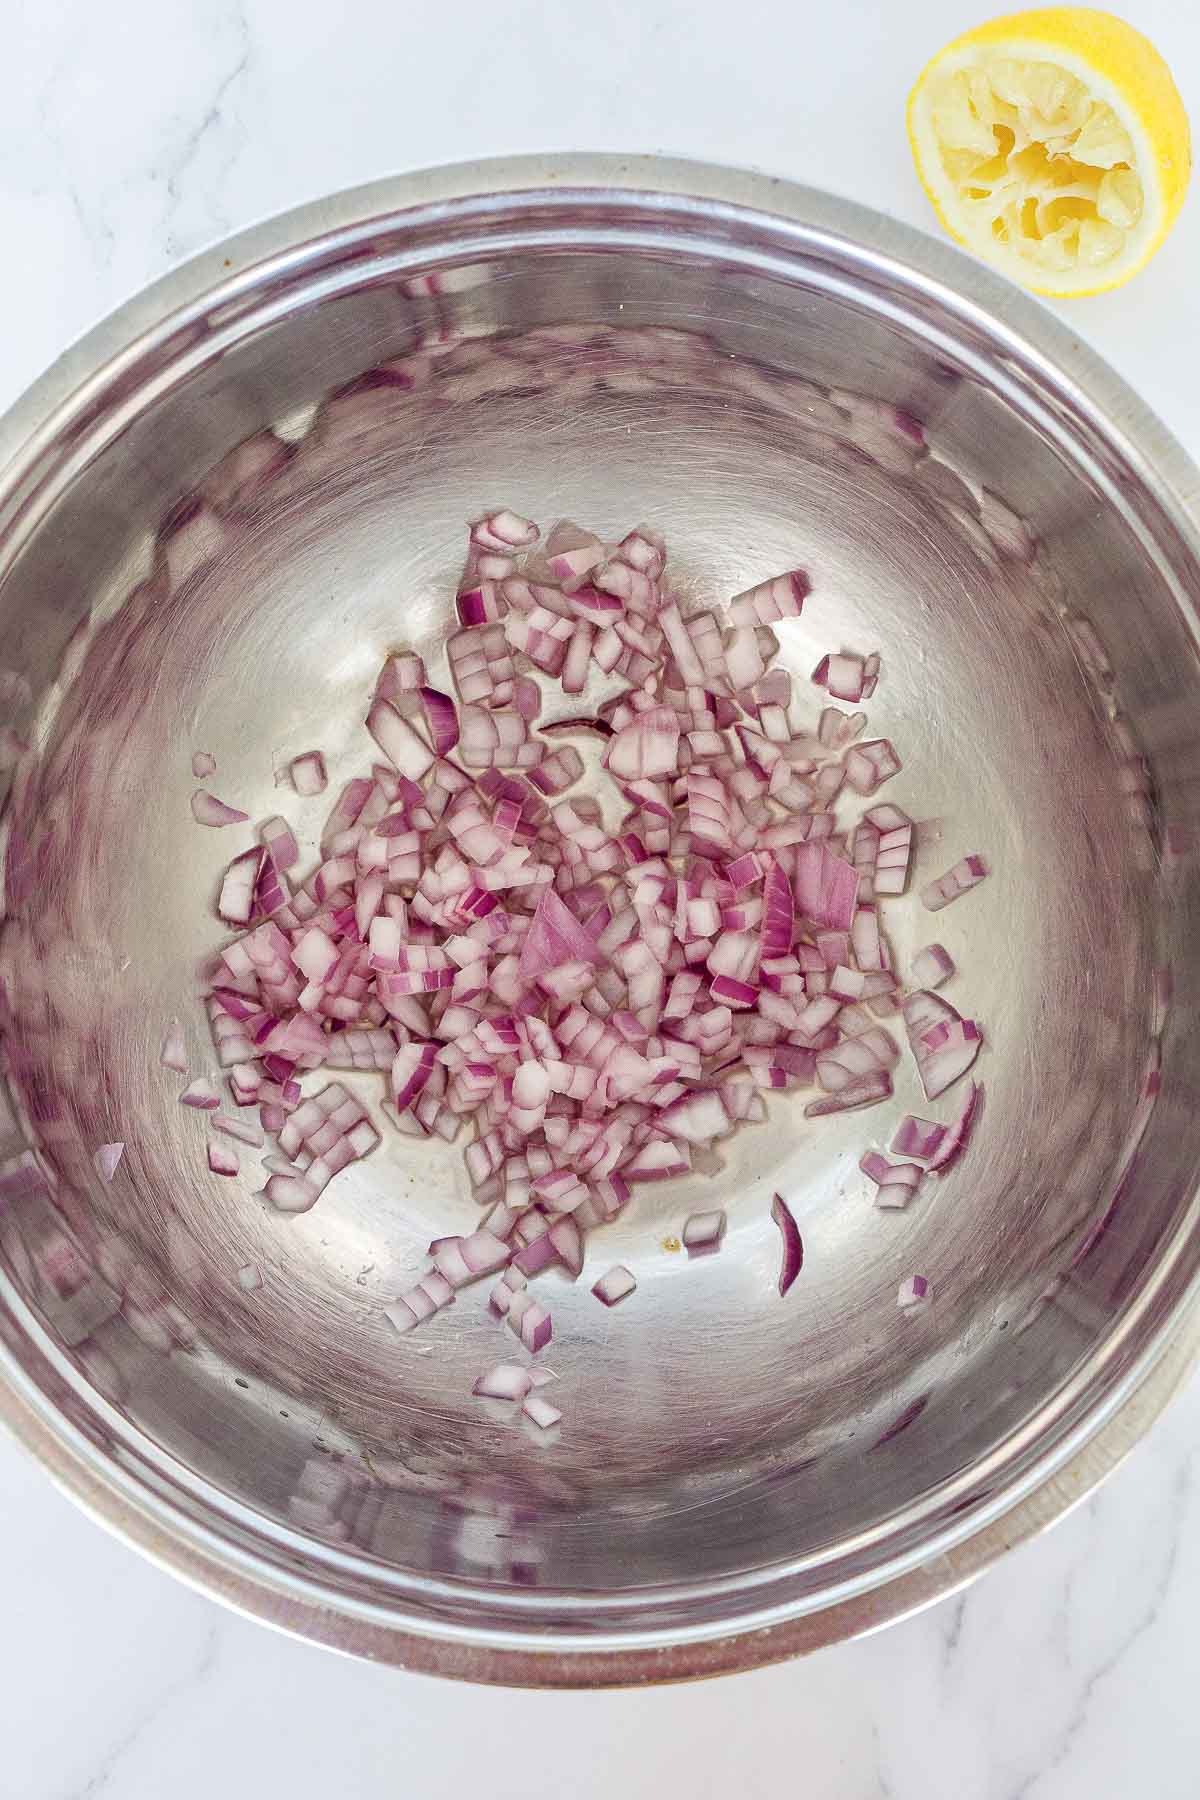 Red onion and lime juice in a bowl.